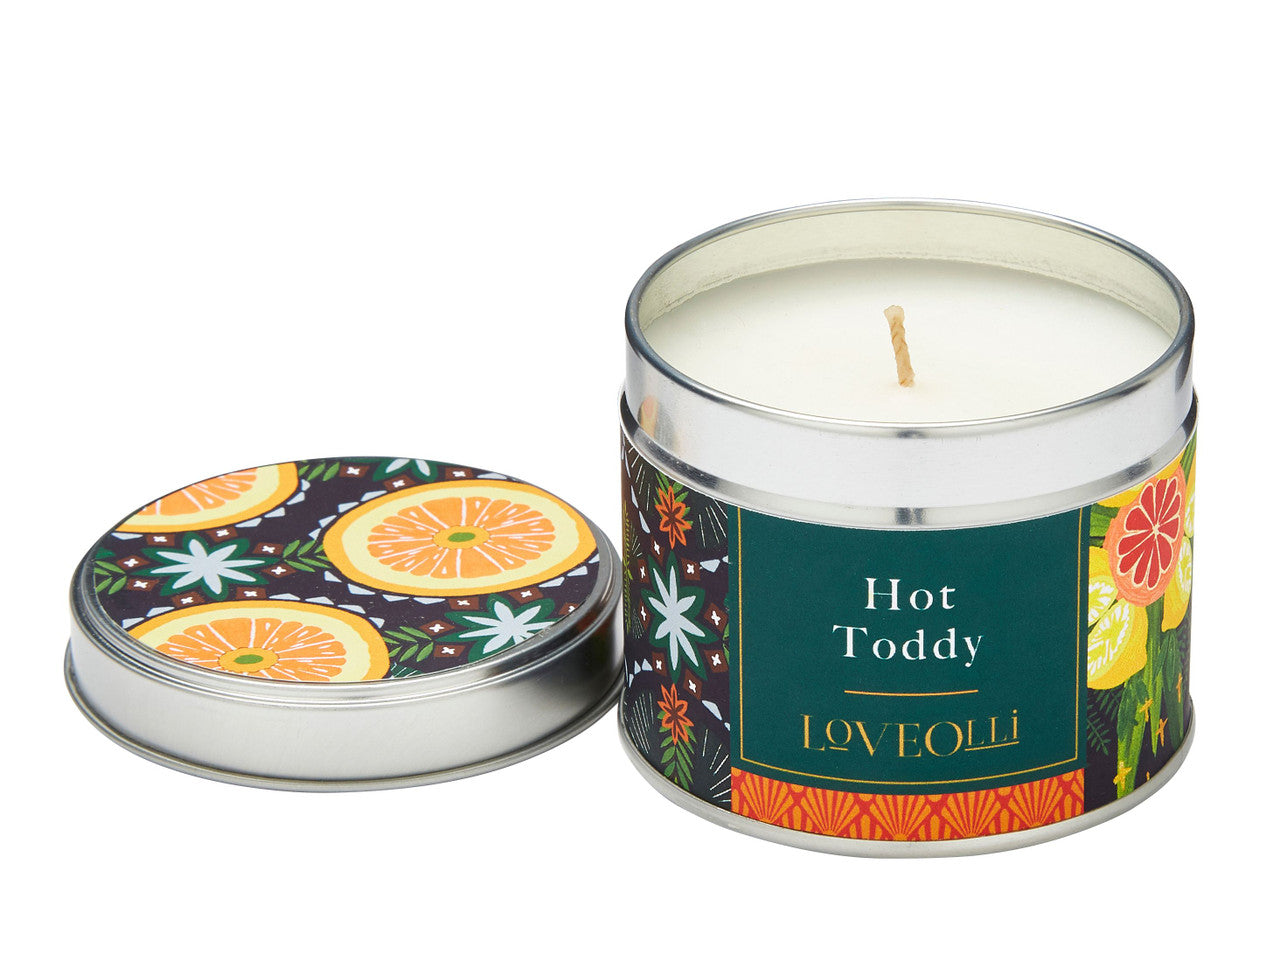 Love Olli Hot Toddy scented tin candle. Hand poured in the UK.